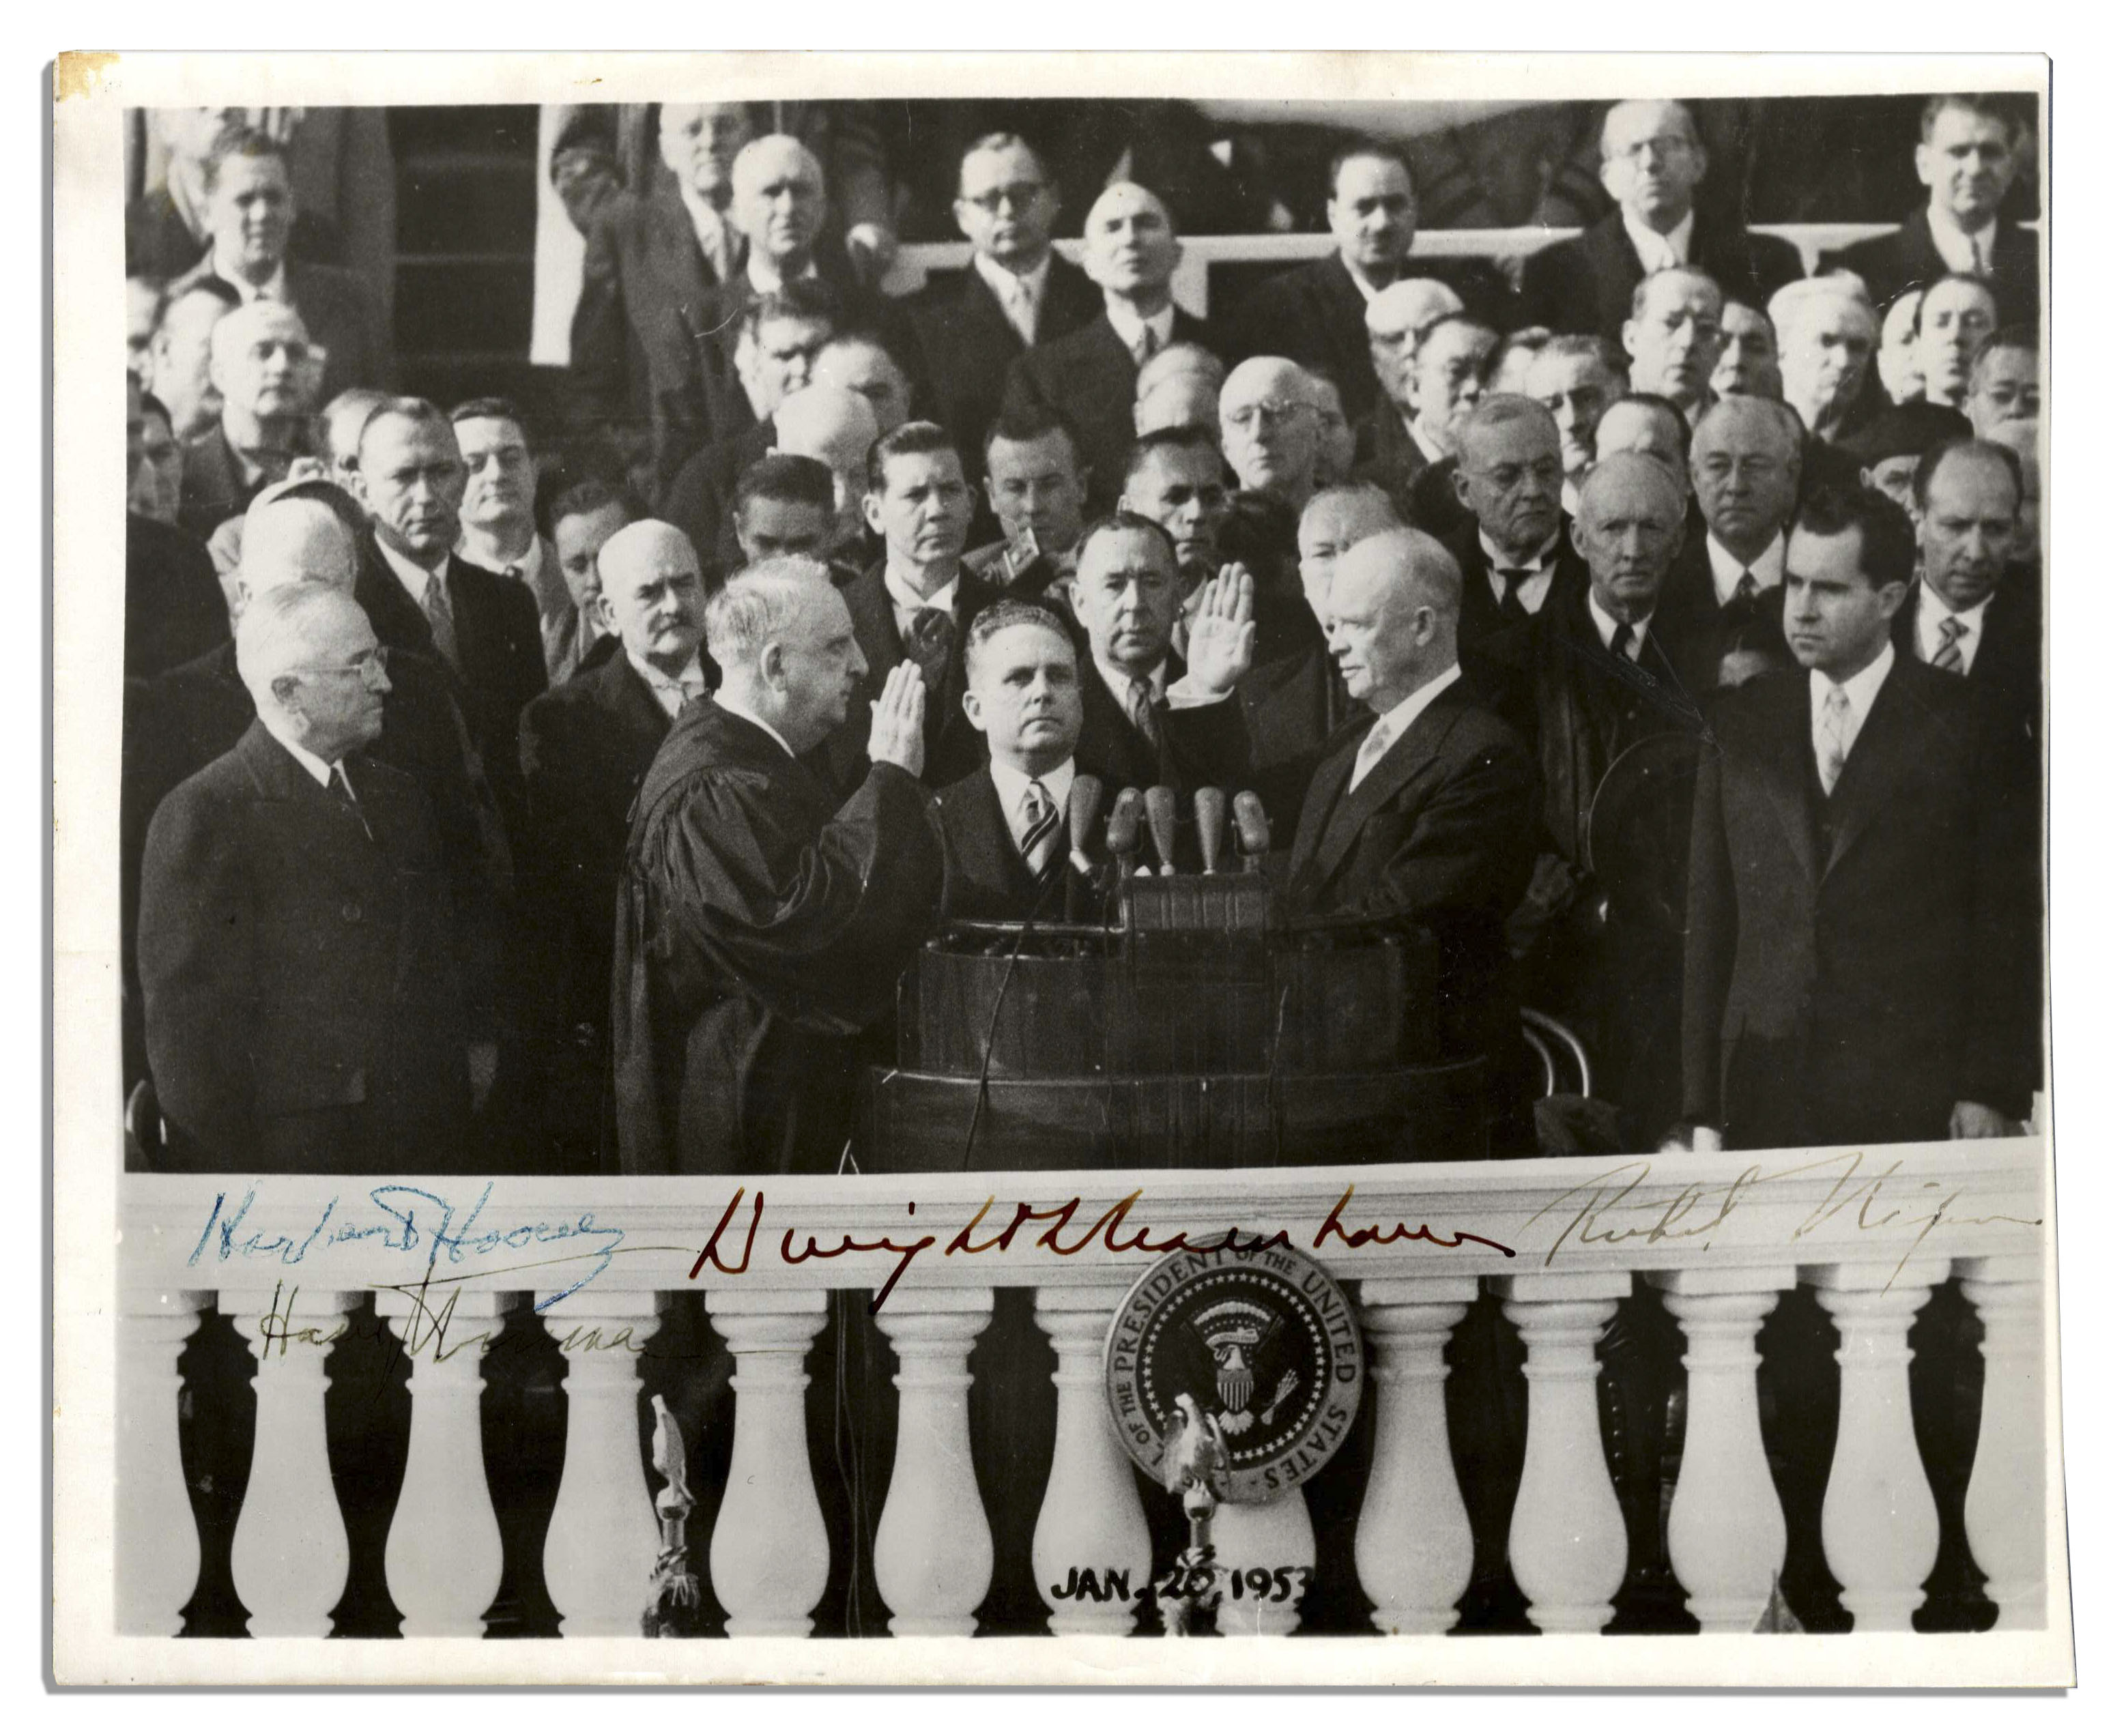 Harry Truman Memorabilia Multi-Presidential Signed Photo: Eisenhower, Truman, Hoover & Nixon Sign a Photo of Eisenhower's Inauguration -- Framed in Wood From Inauguration Stand -- With PSA/DNA COA for All Signatures